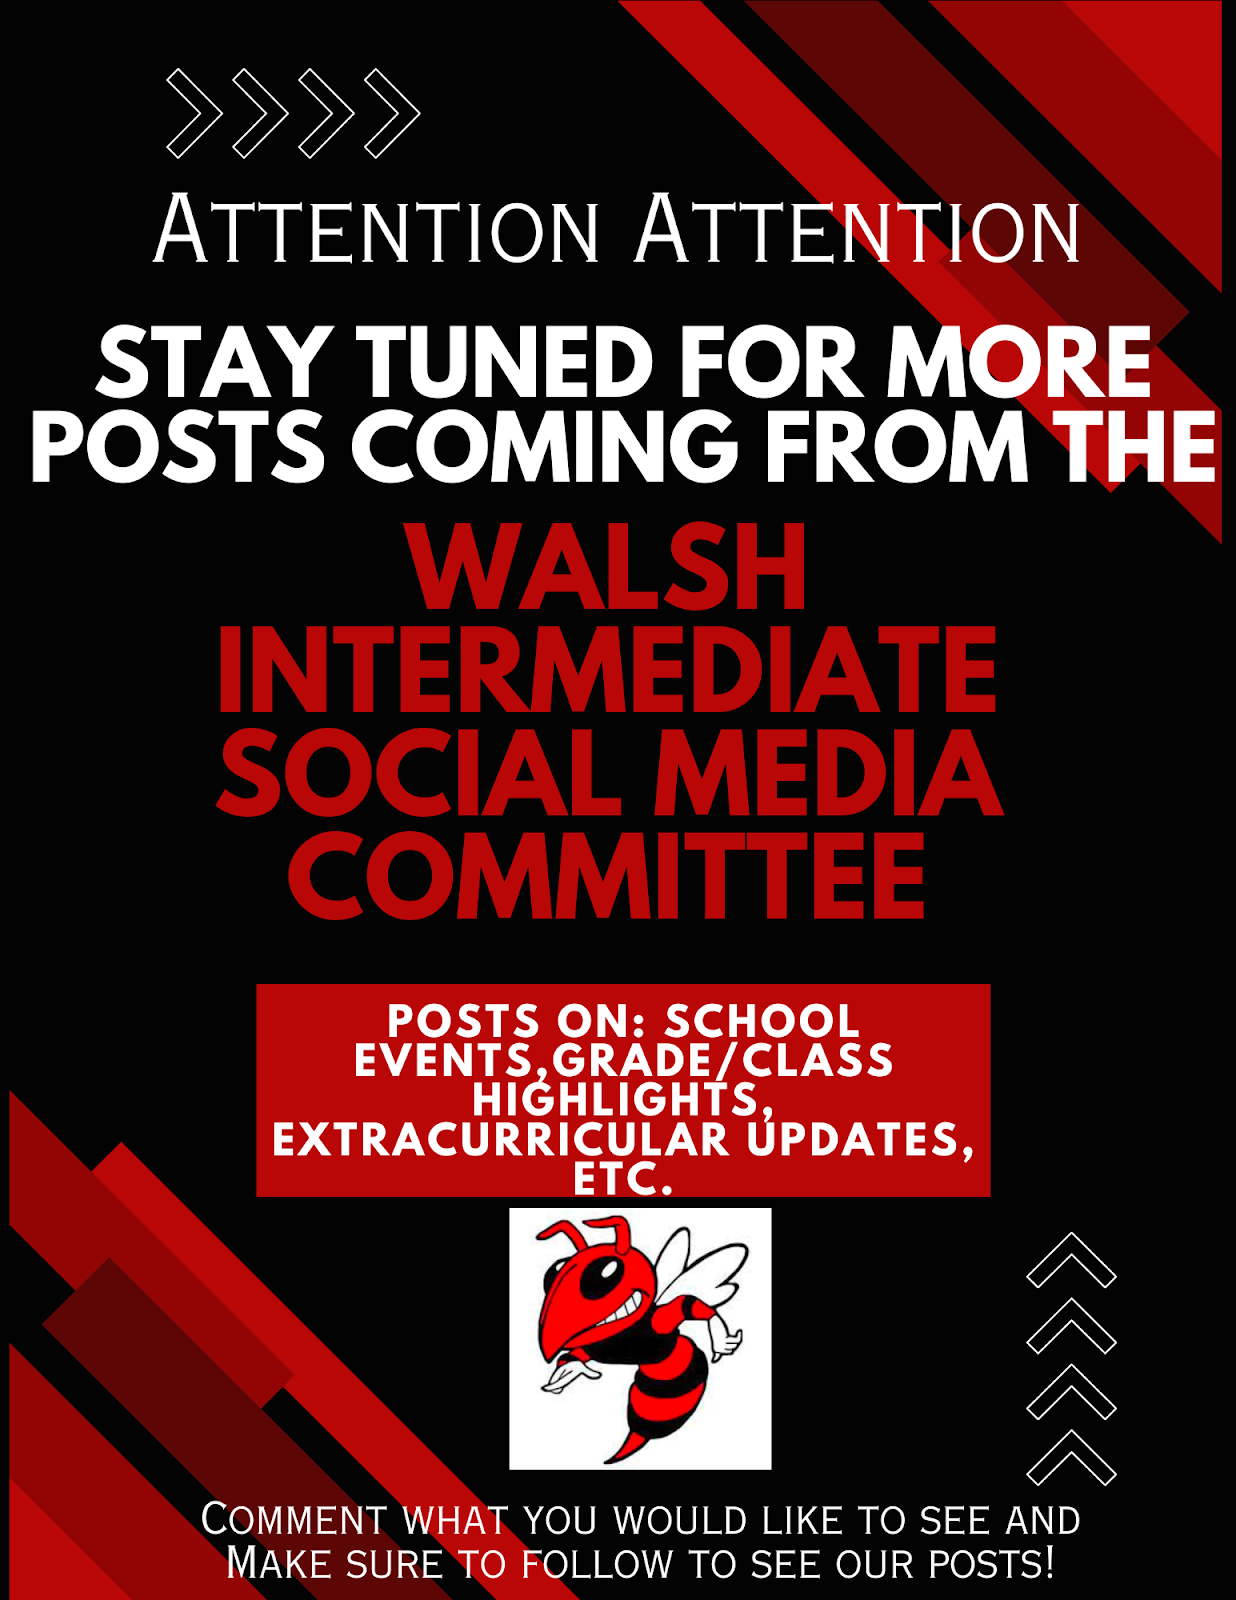 Attention Attention, Stay tuned for more posts coming from the Walsh Intermediate Social Media Committee, Posts on: school events, grade/class highlights, extracurricular updates, etc., comment what you would like to see and make sure to follow to see our posts!